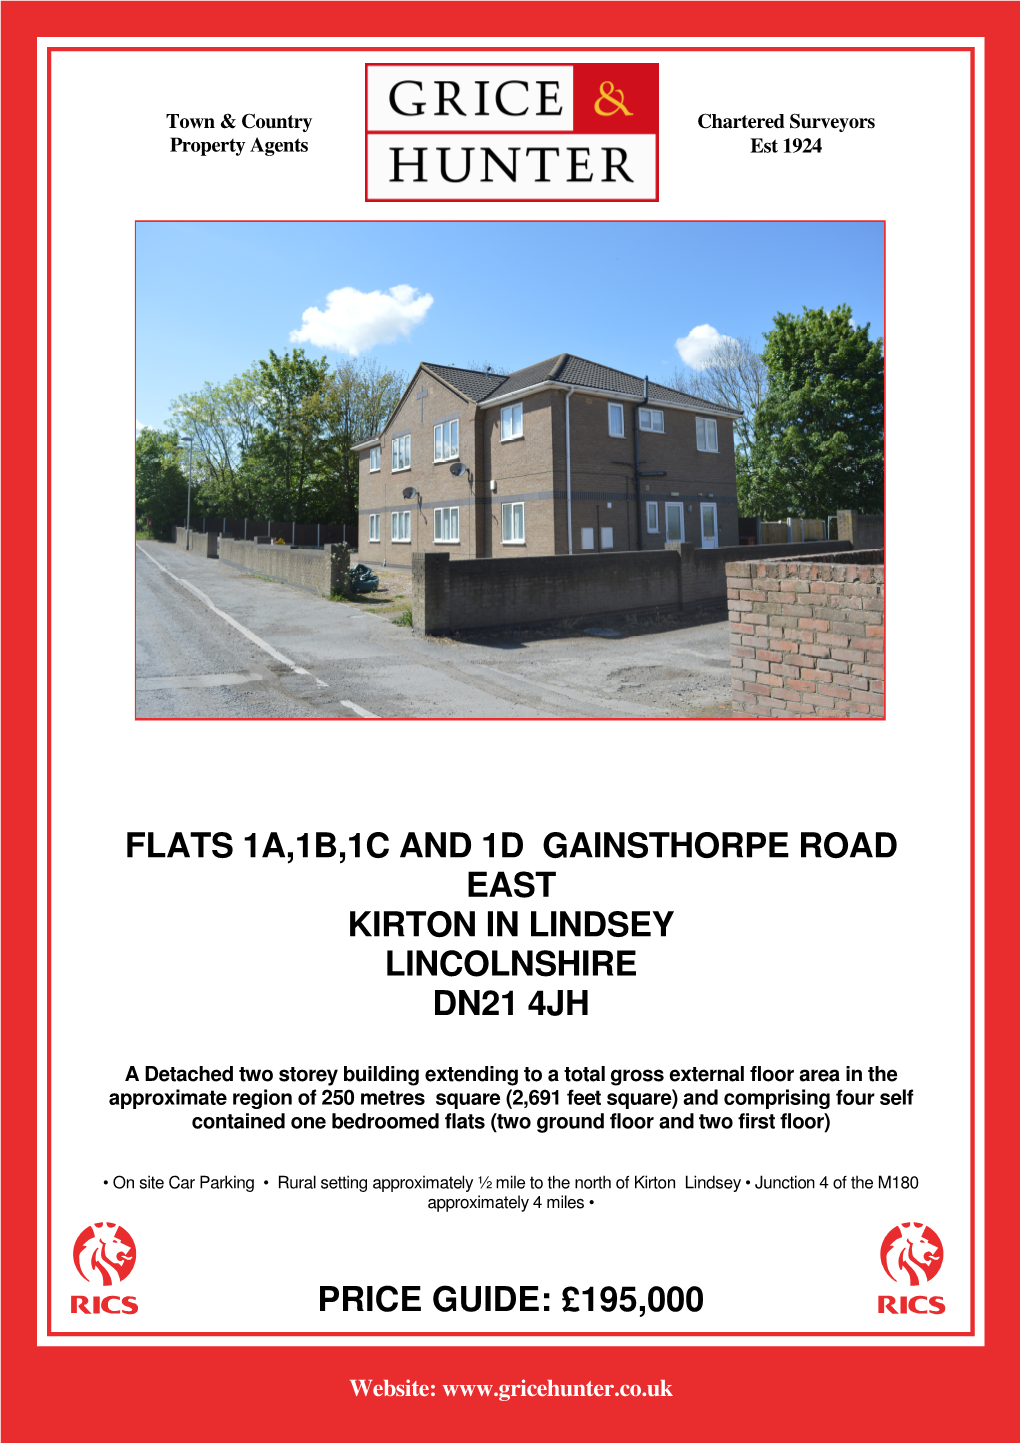 Flats 1A,1B,1C and 1D Gainsthorpe Road East Kirton in Lindsey Lincolnshire Dn21 4Jh